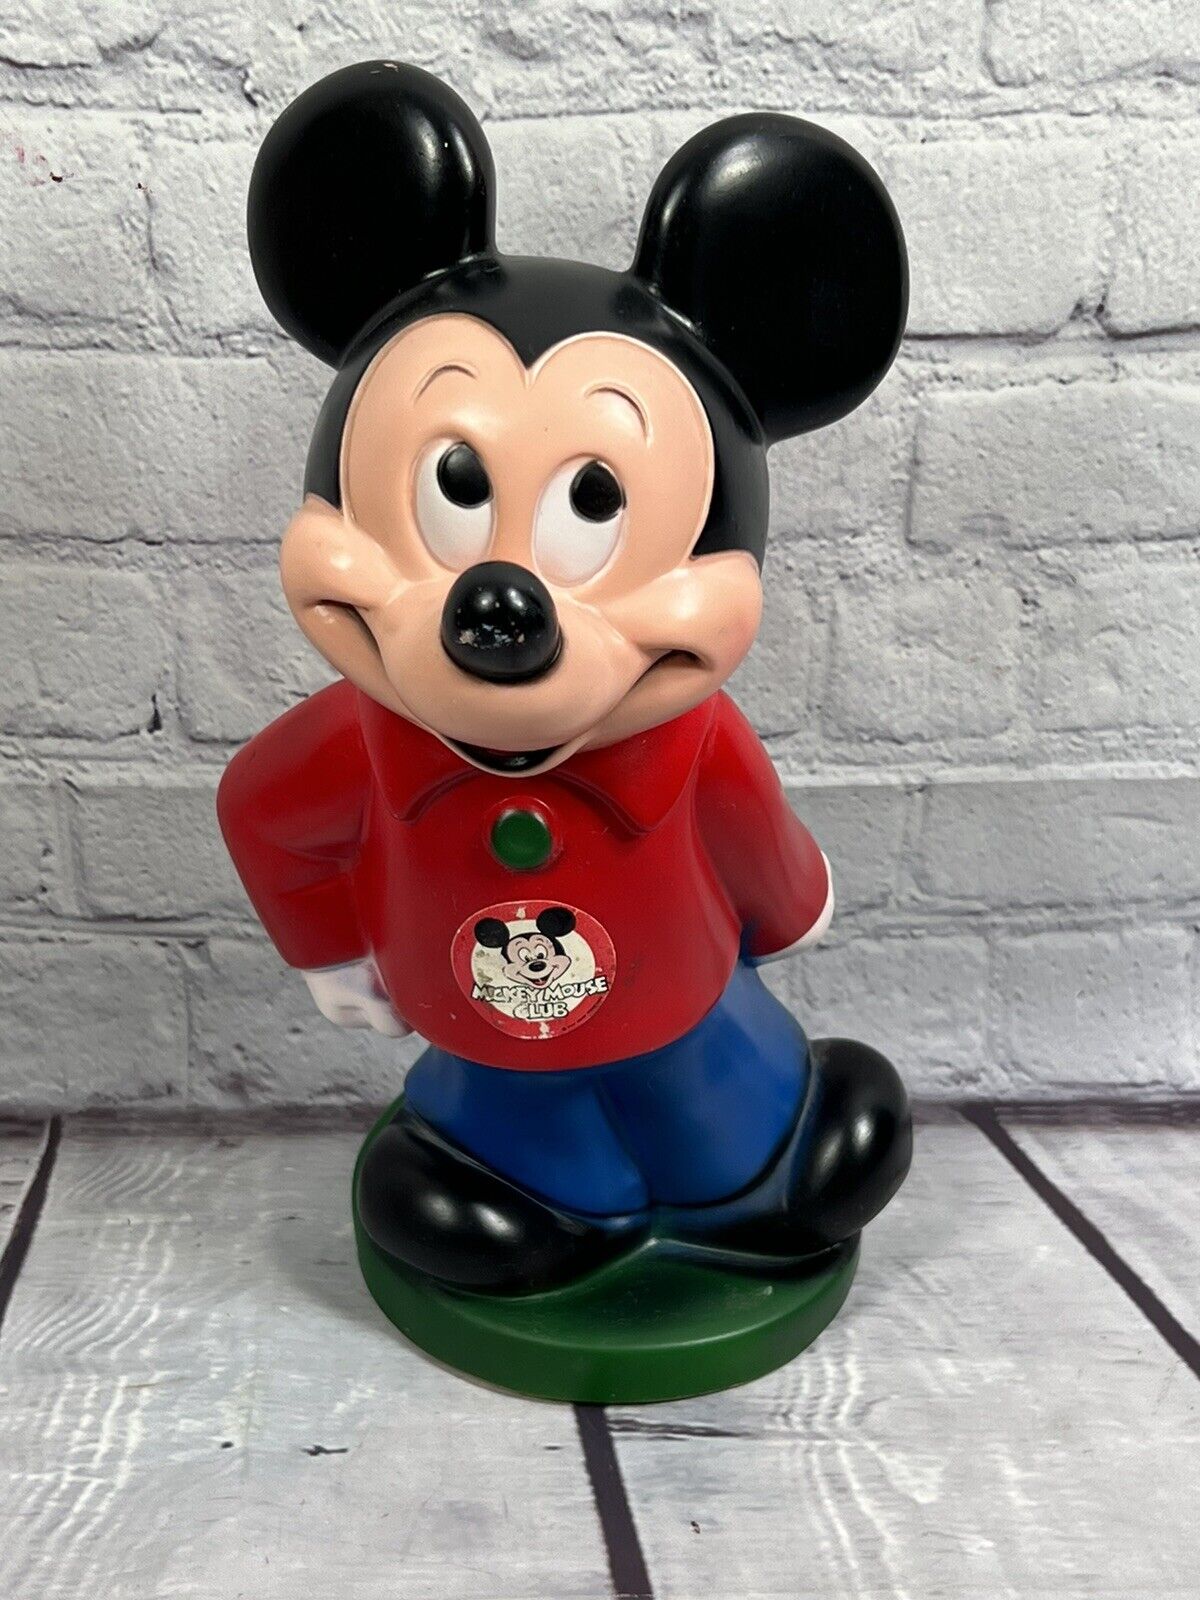 vtg 70’s Mickey Mouse Club coin bank Play Pal plastics Walt Disney12”collectable